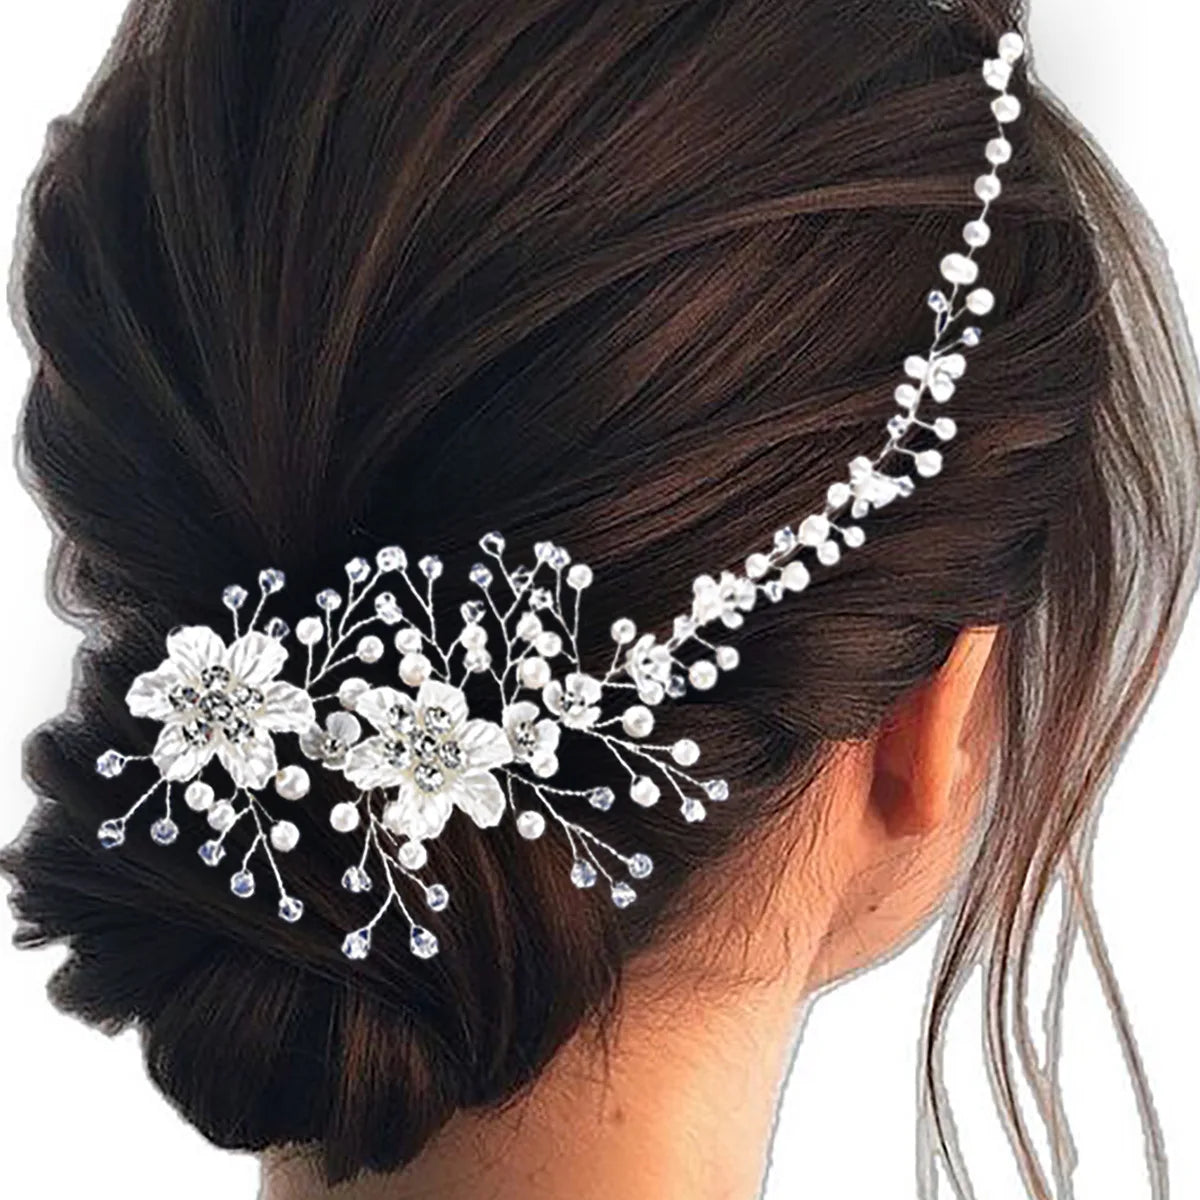 Crystal Wedding Hair Combs Miraculous Women Side Hairbands Accessories Peal Flower Bridal Headpiece Clip Bride Jewelry Gift